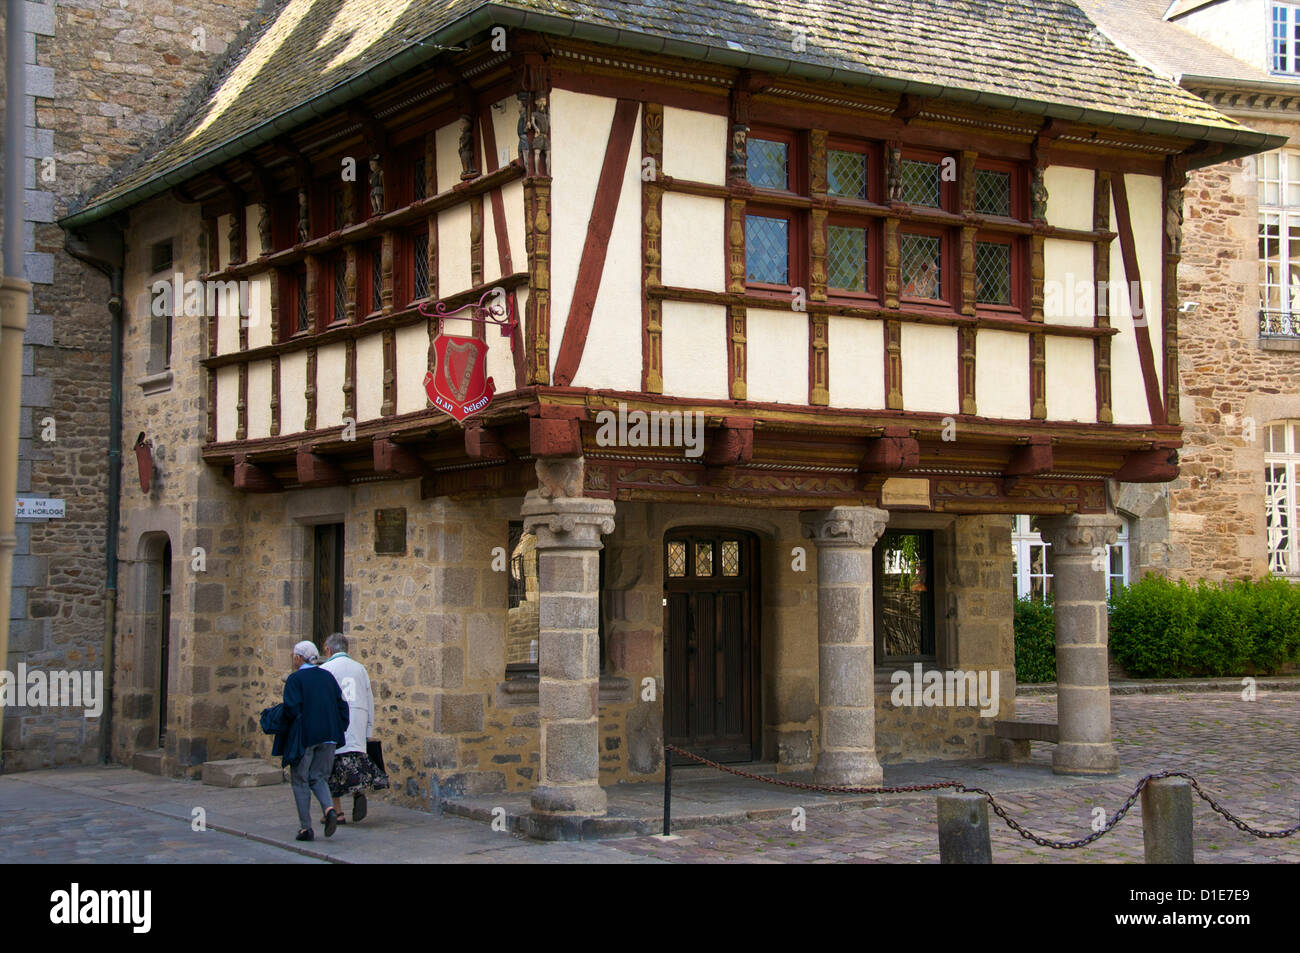 Keratry Mansion house dating from the 16th century, Old Town, Dinan, Brittany, Cotes d'Armor, France, Europe Stock Photo